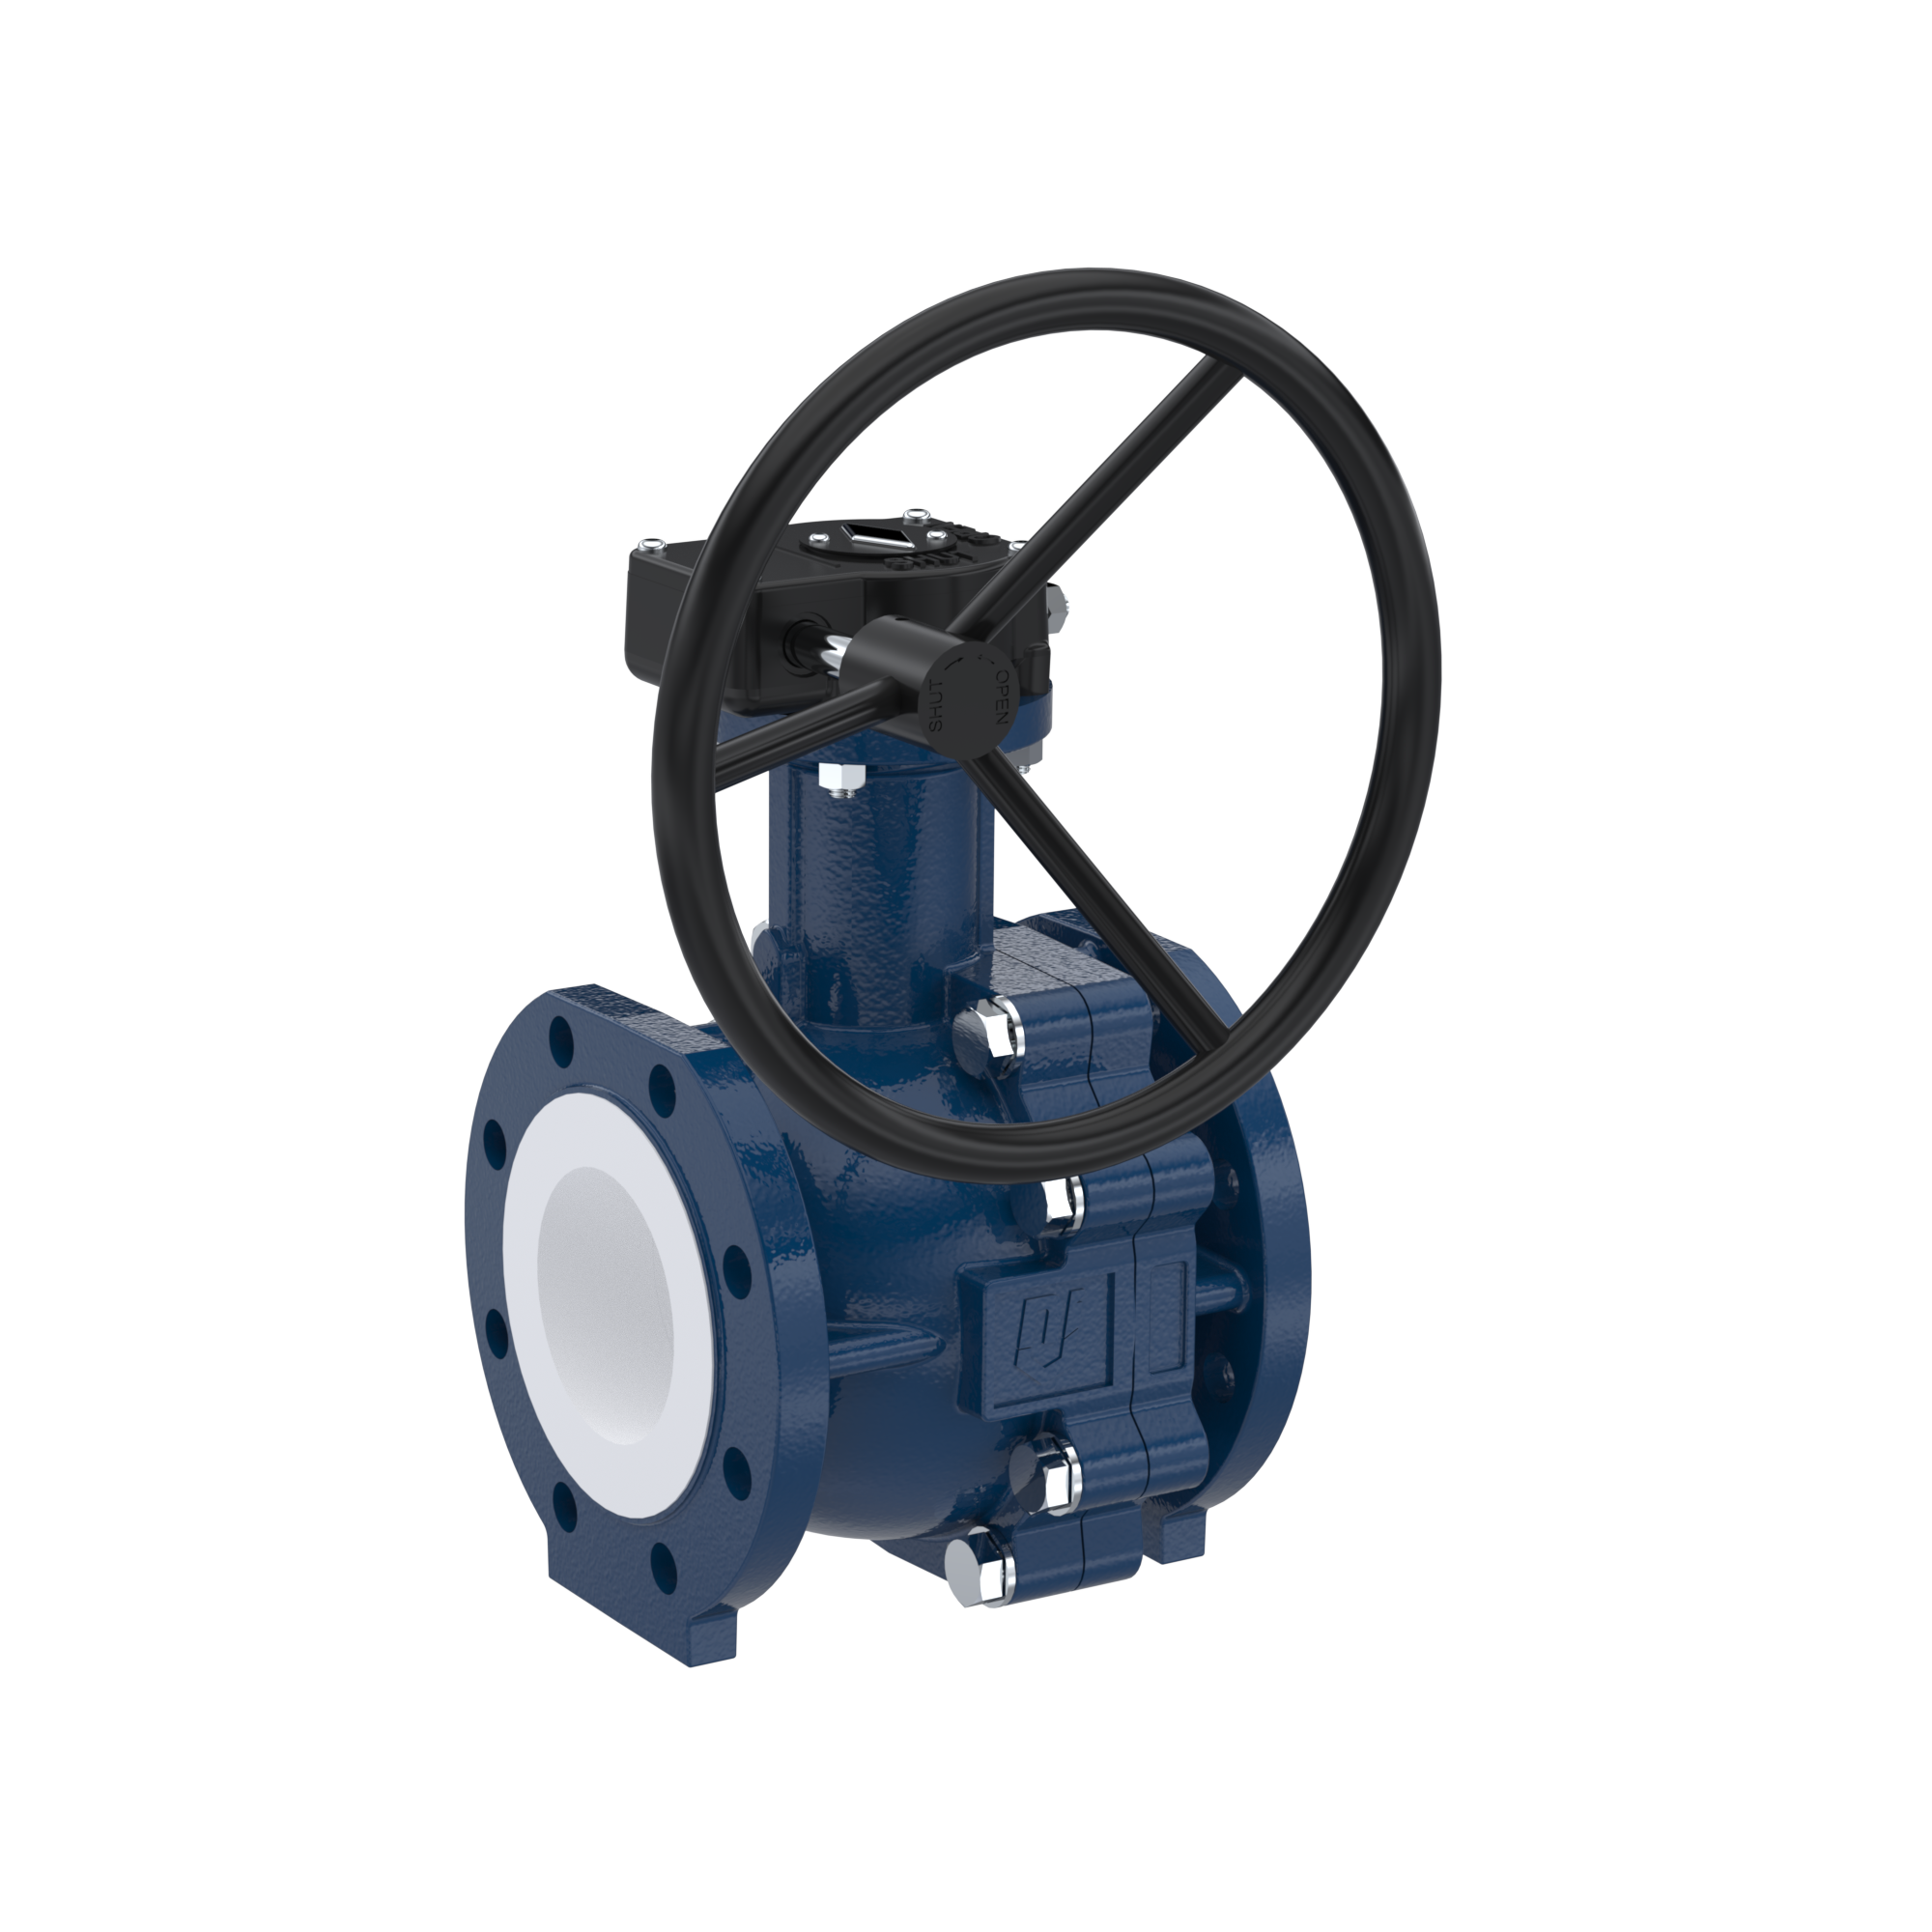 PFA-flange ball valve FK13 DN100 - 4" inch ANSI 150 made of spheroidal graphite cast iron with worm gear